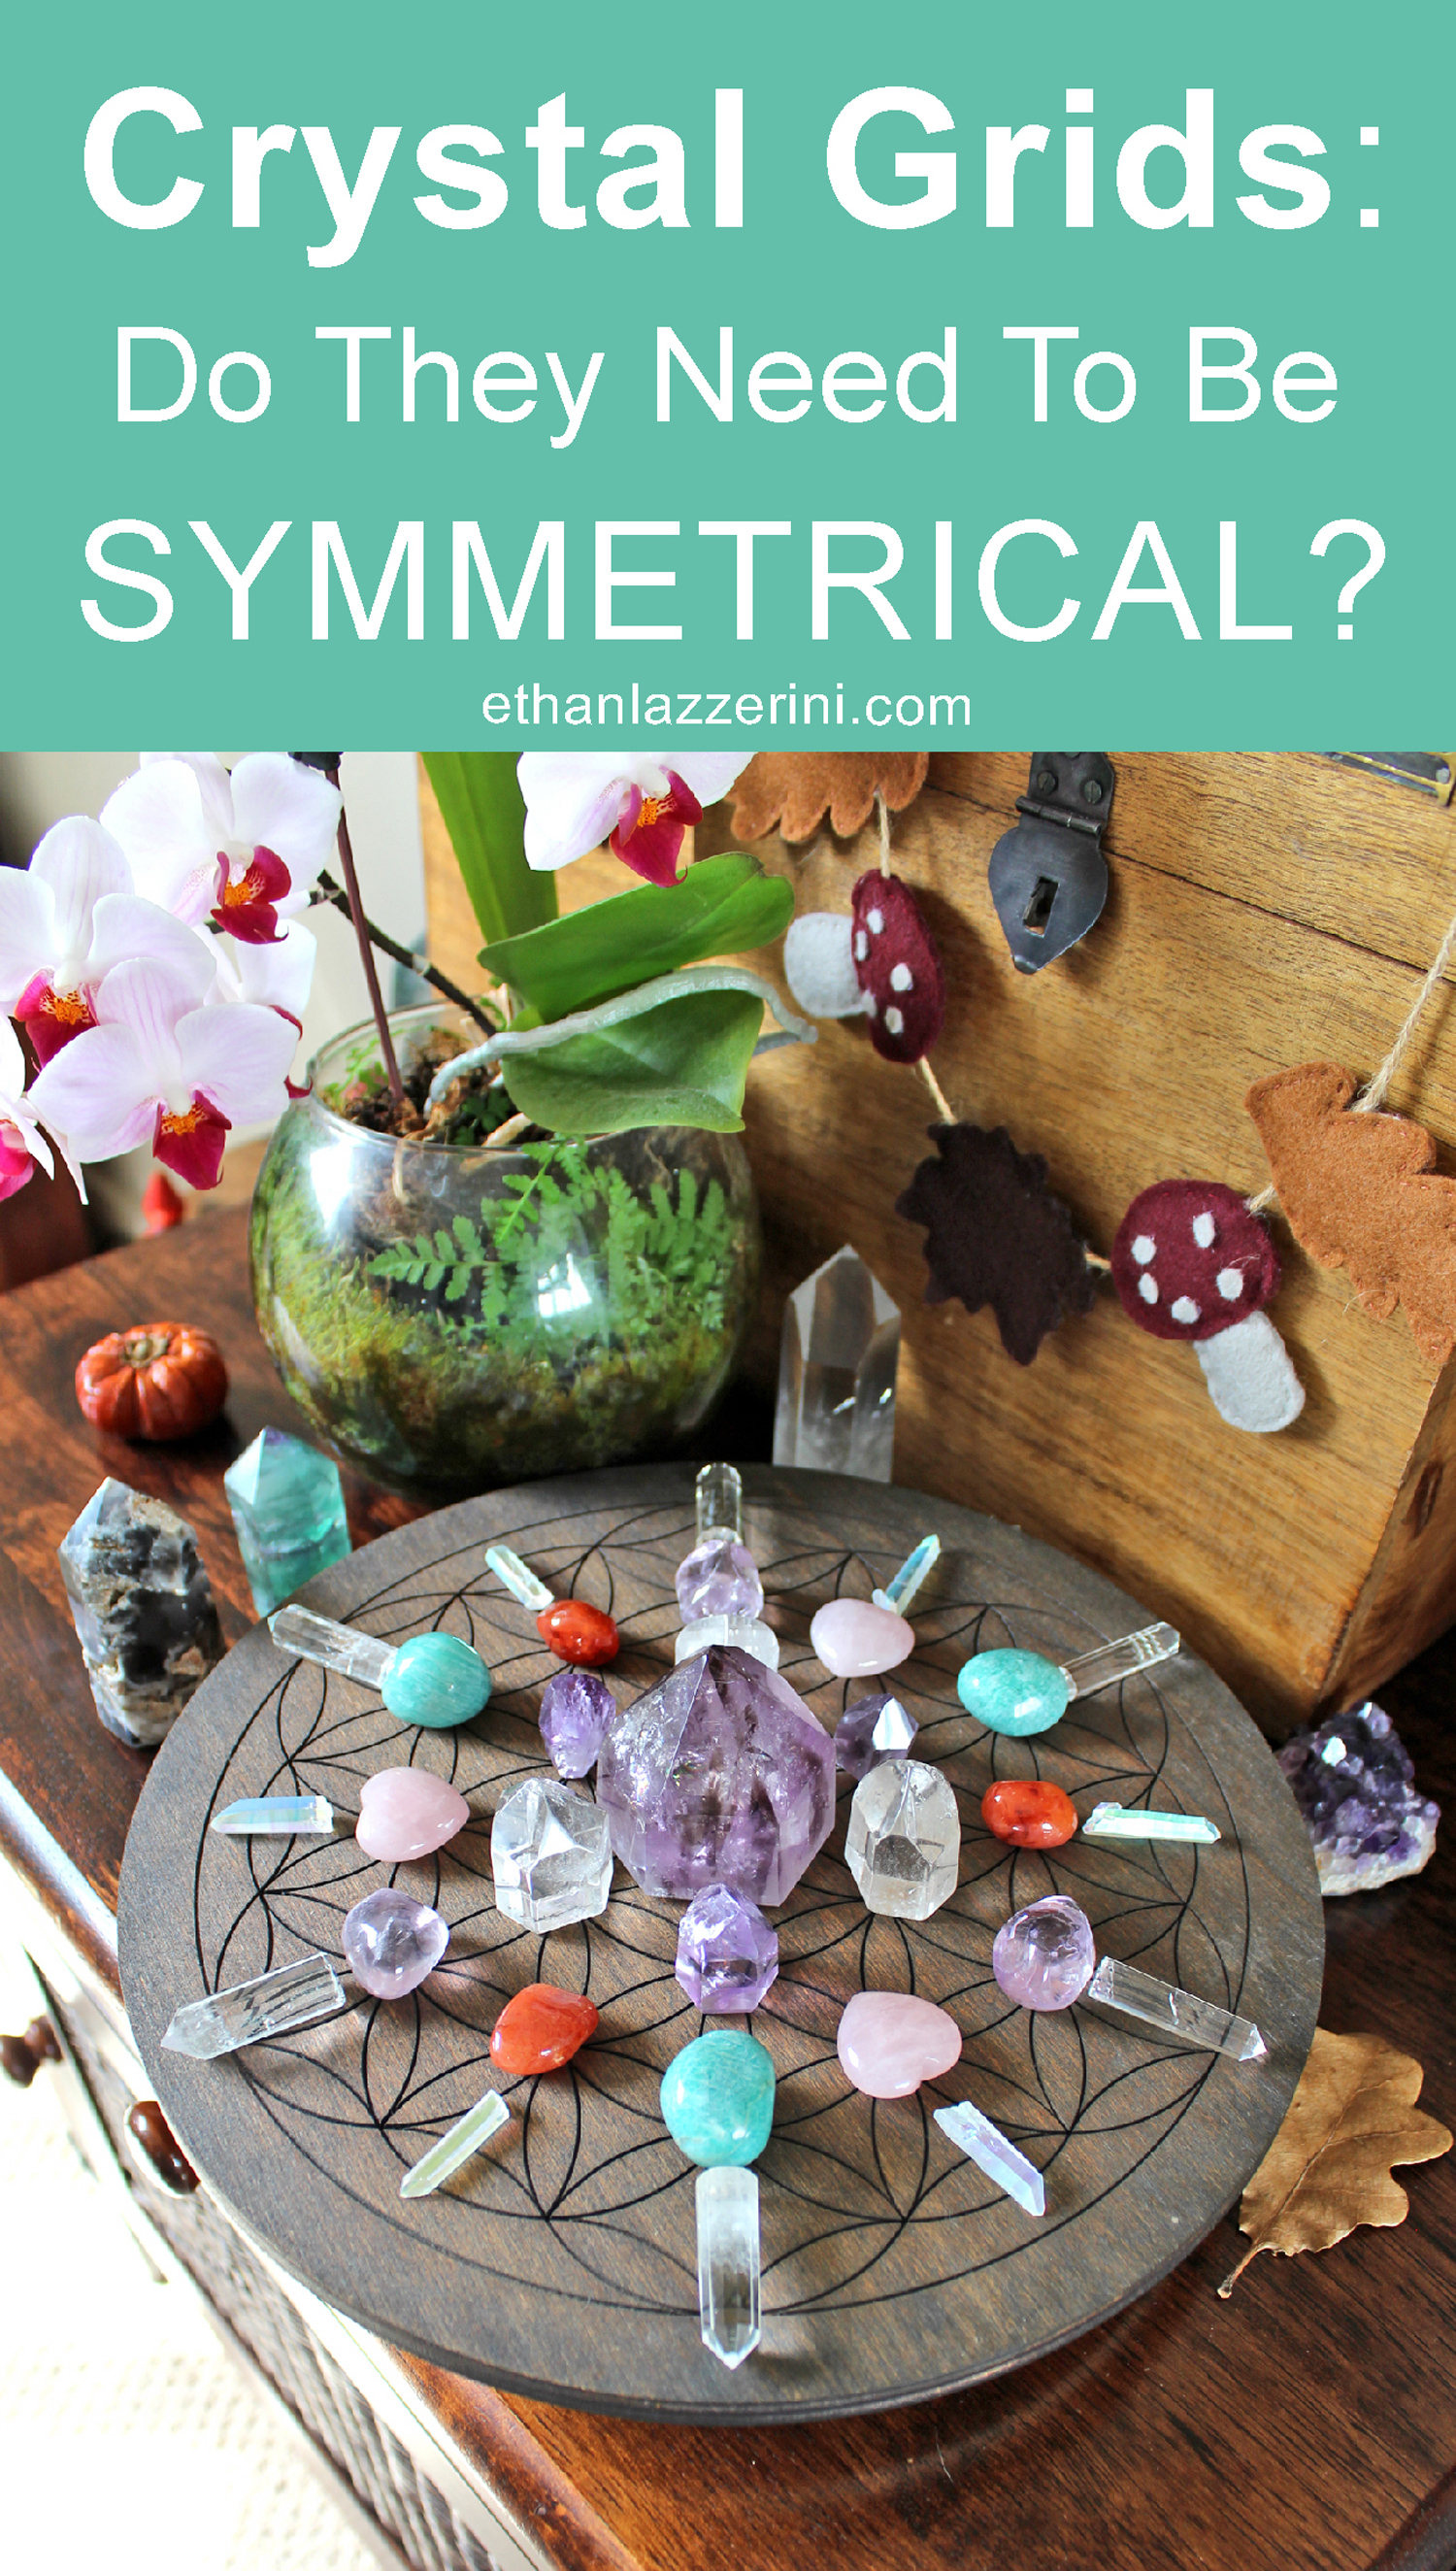 Do crystal grids have to be symmetrical?